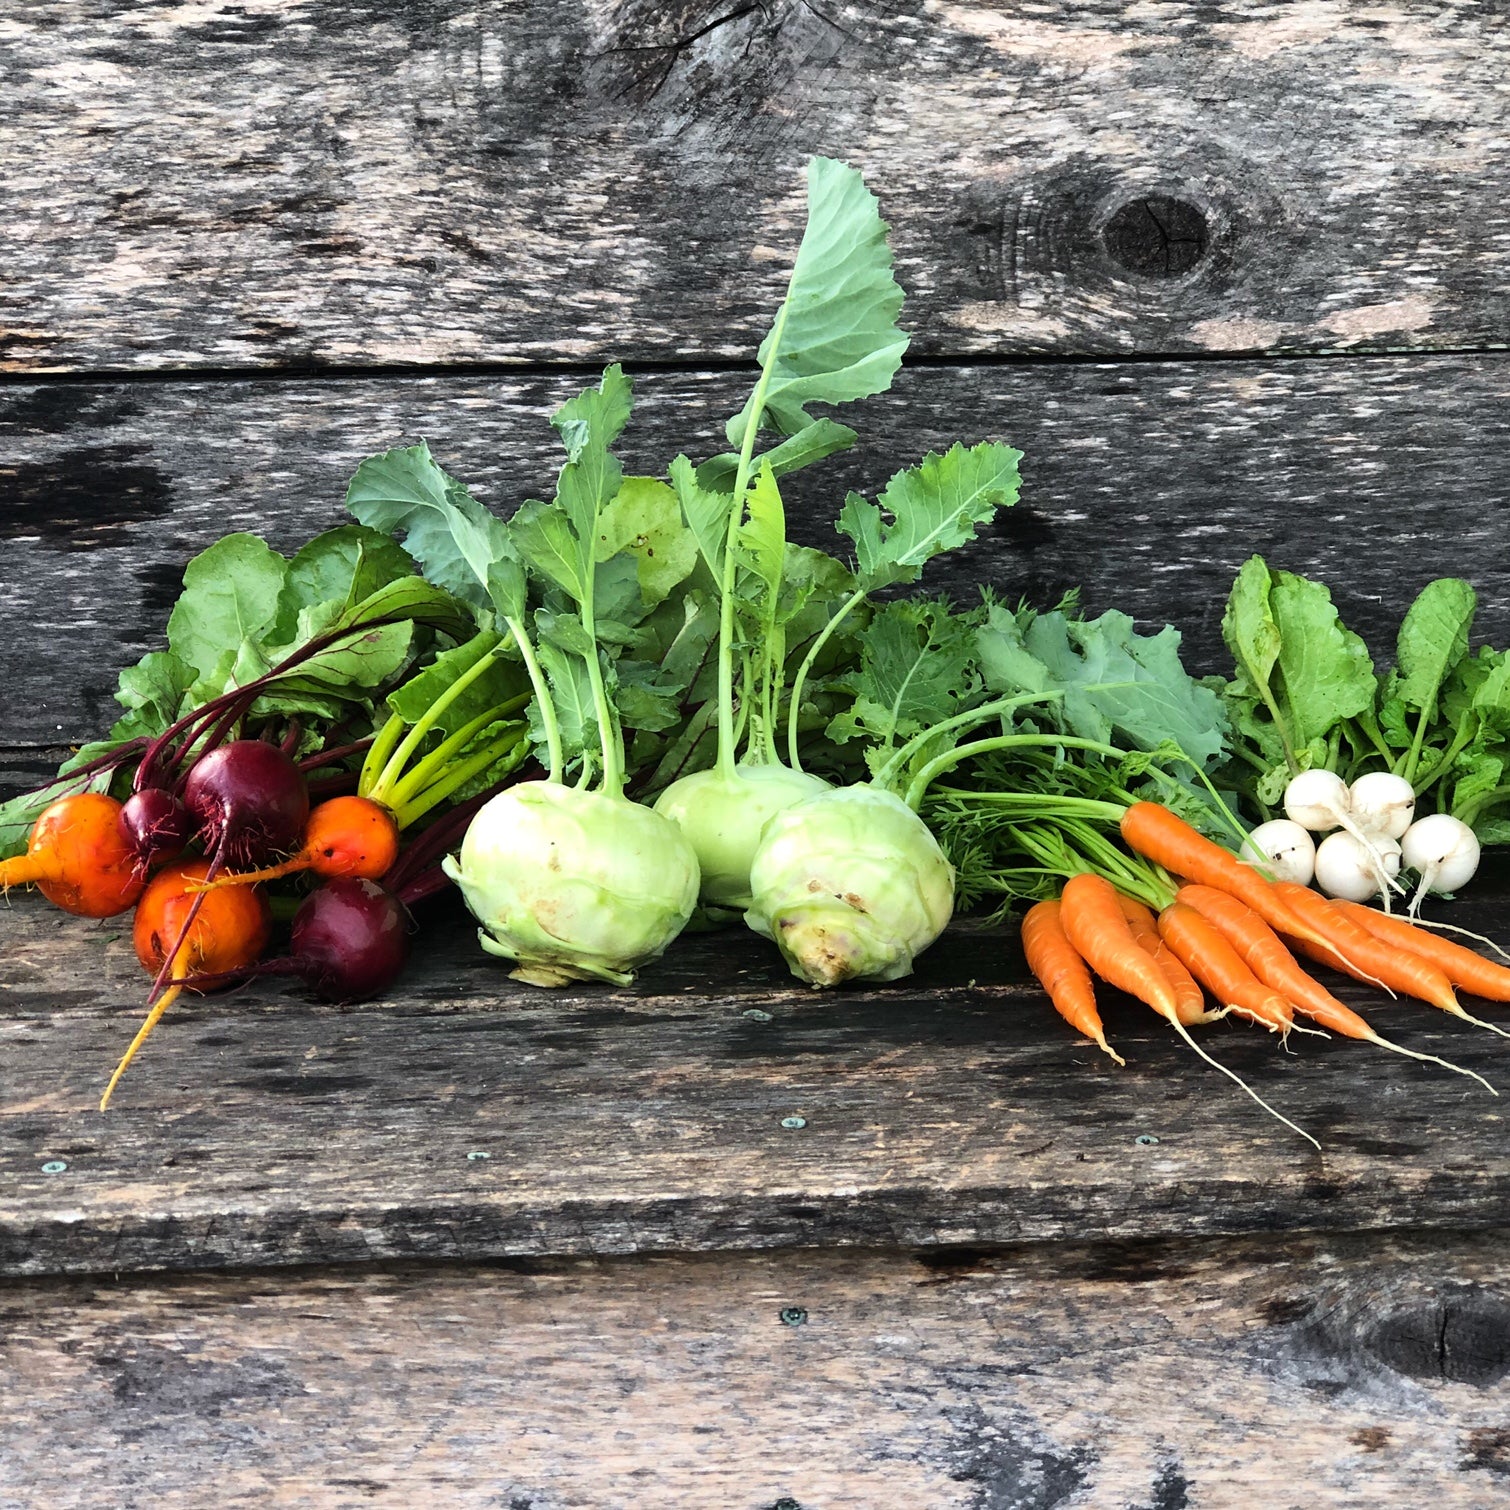 Colorful collection of root vegetables and kohlrabi from Red Thread Farm